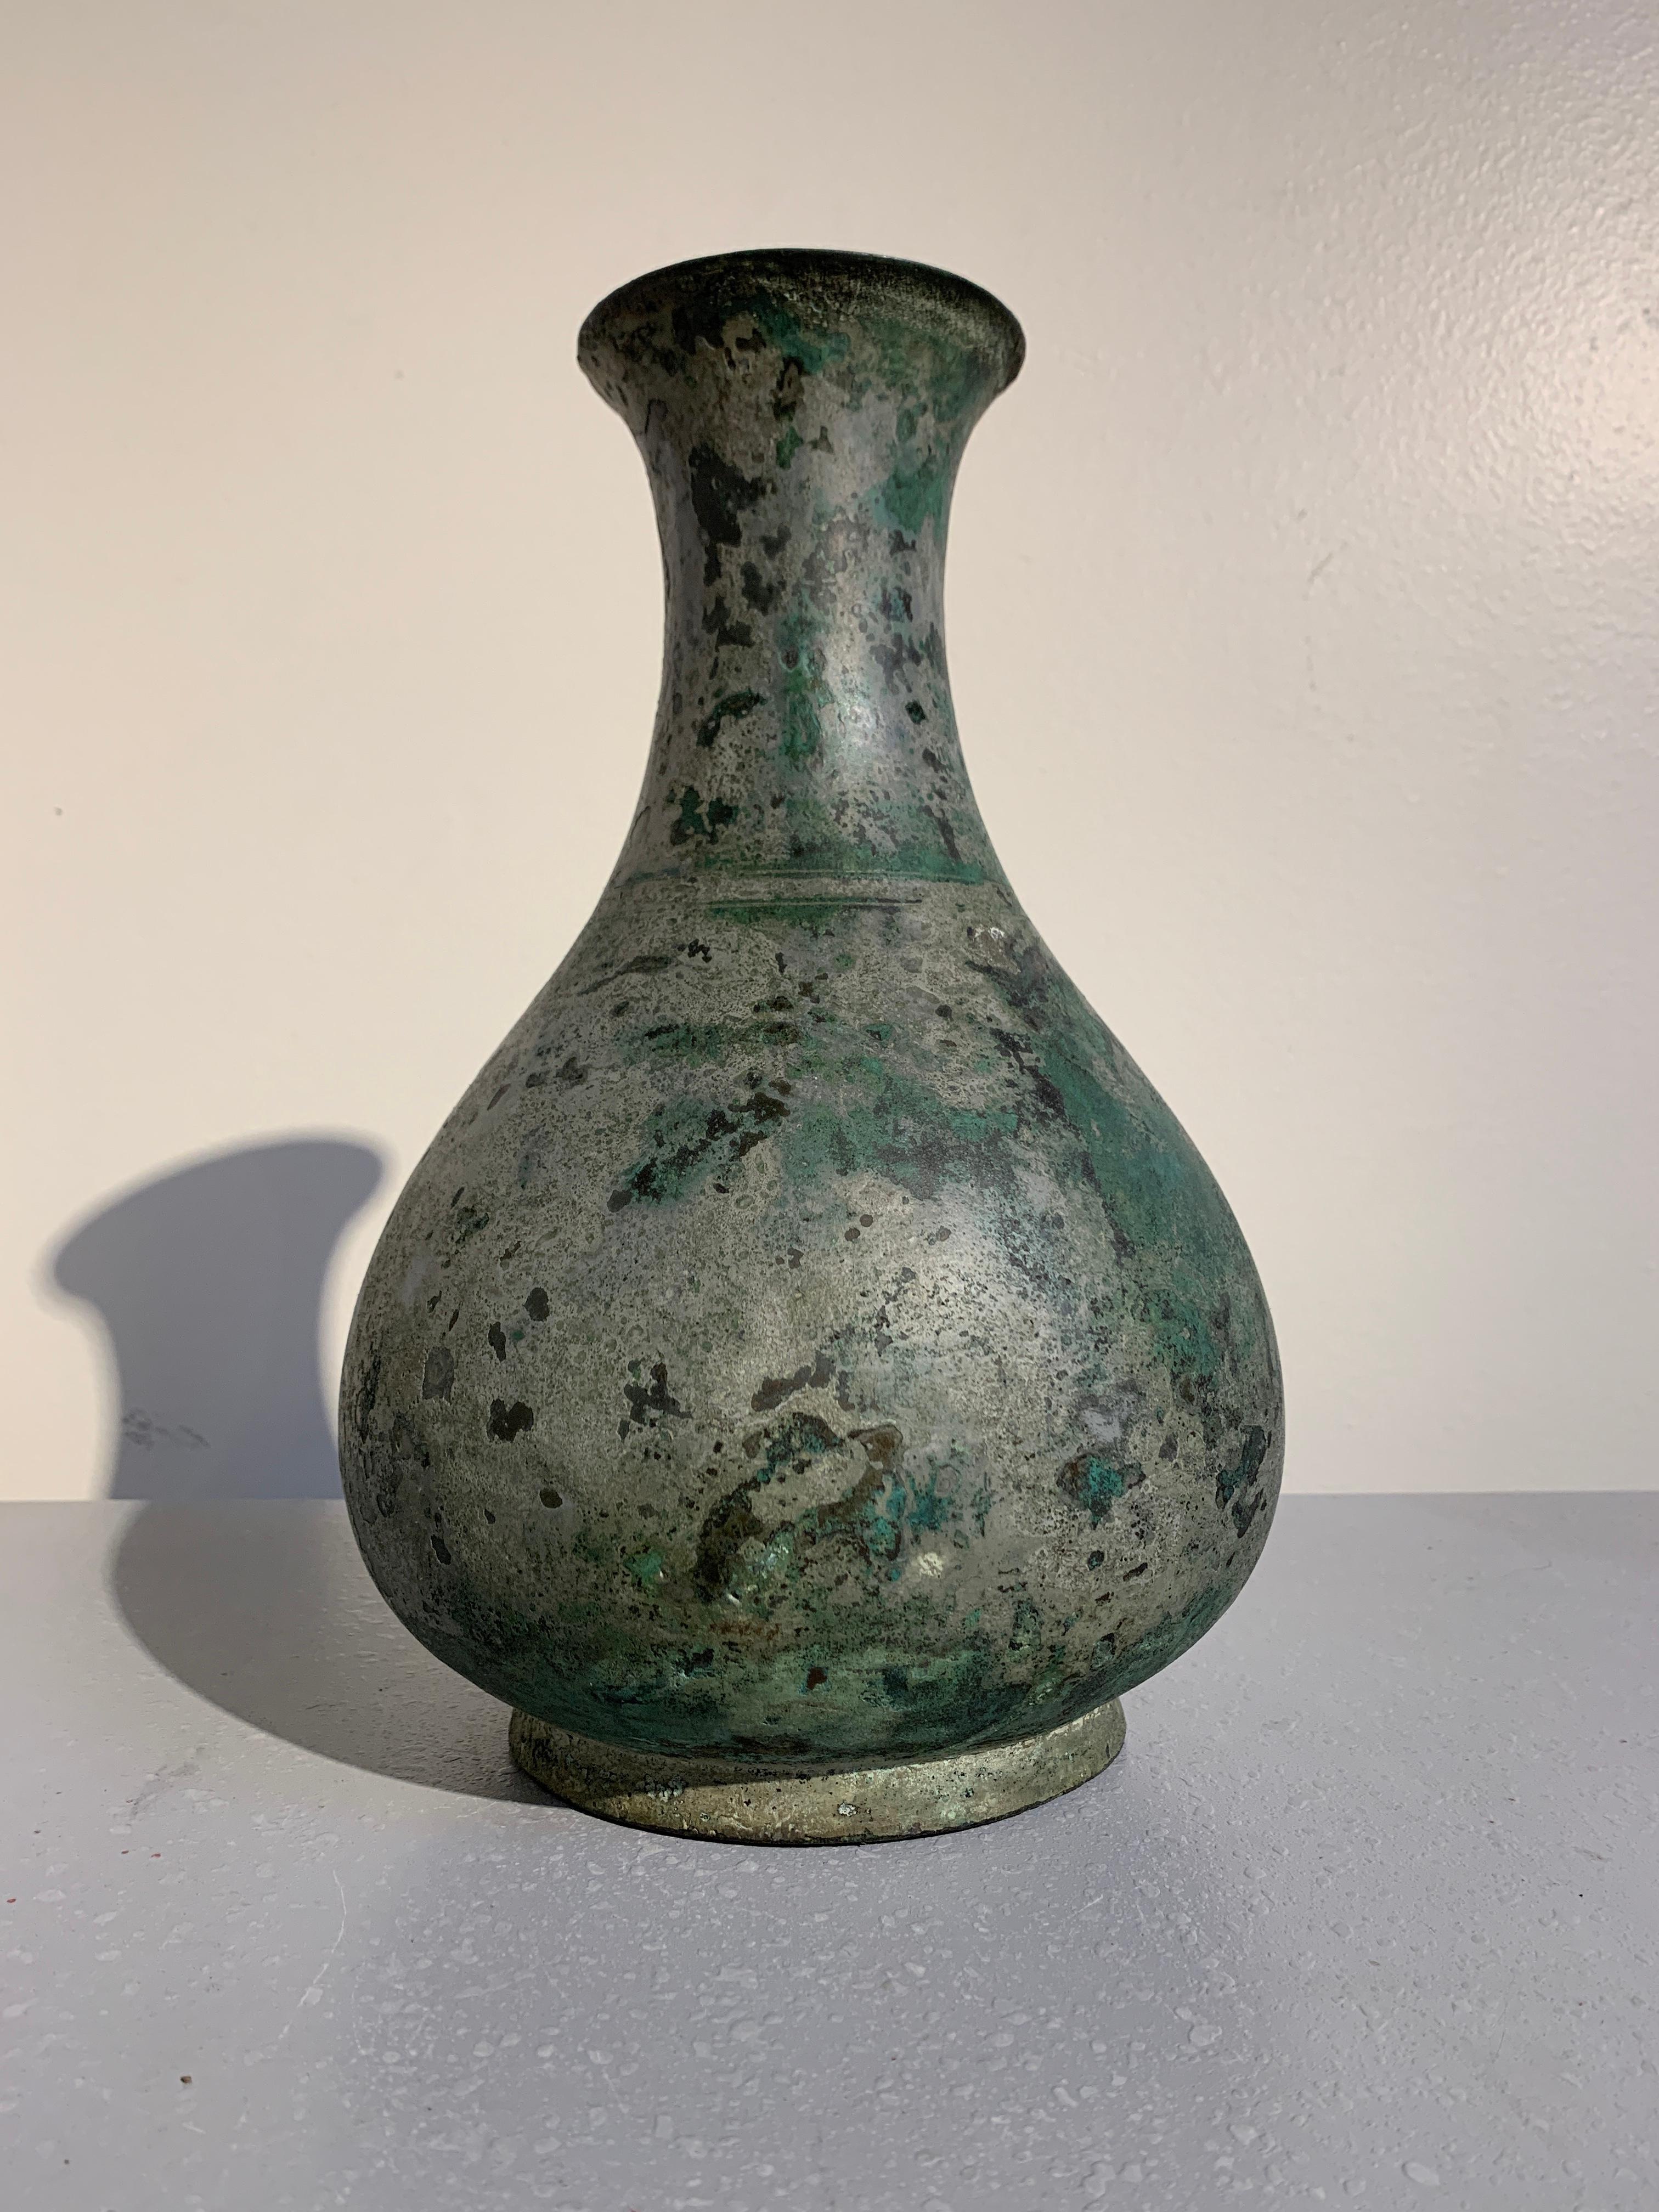 A stunningly patinated Korean Goreyo Dynasty ritual bronze bottle vase, 12th-13th century, Korea. 

The ritual bottle vase of pear shape. The squat body set upon a short foot with a wide neck rising to an everted mouth. 
The bronze vessel covered